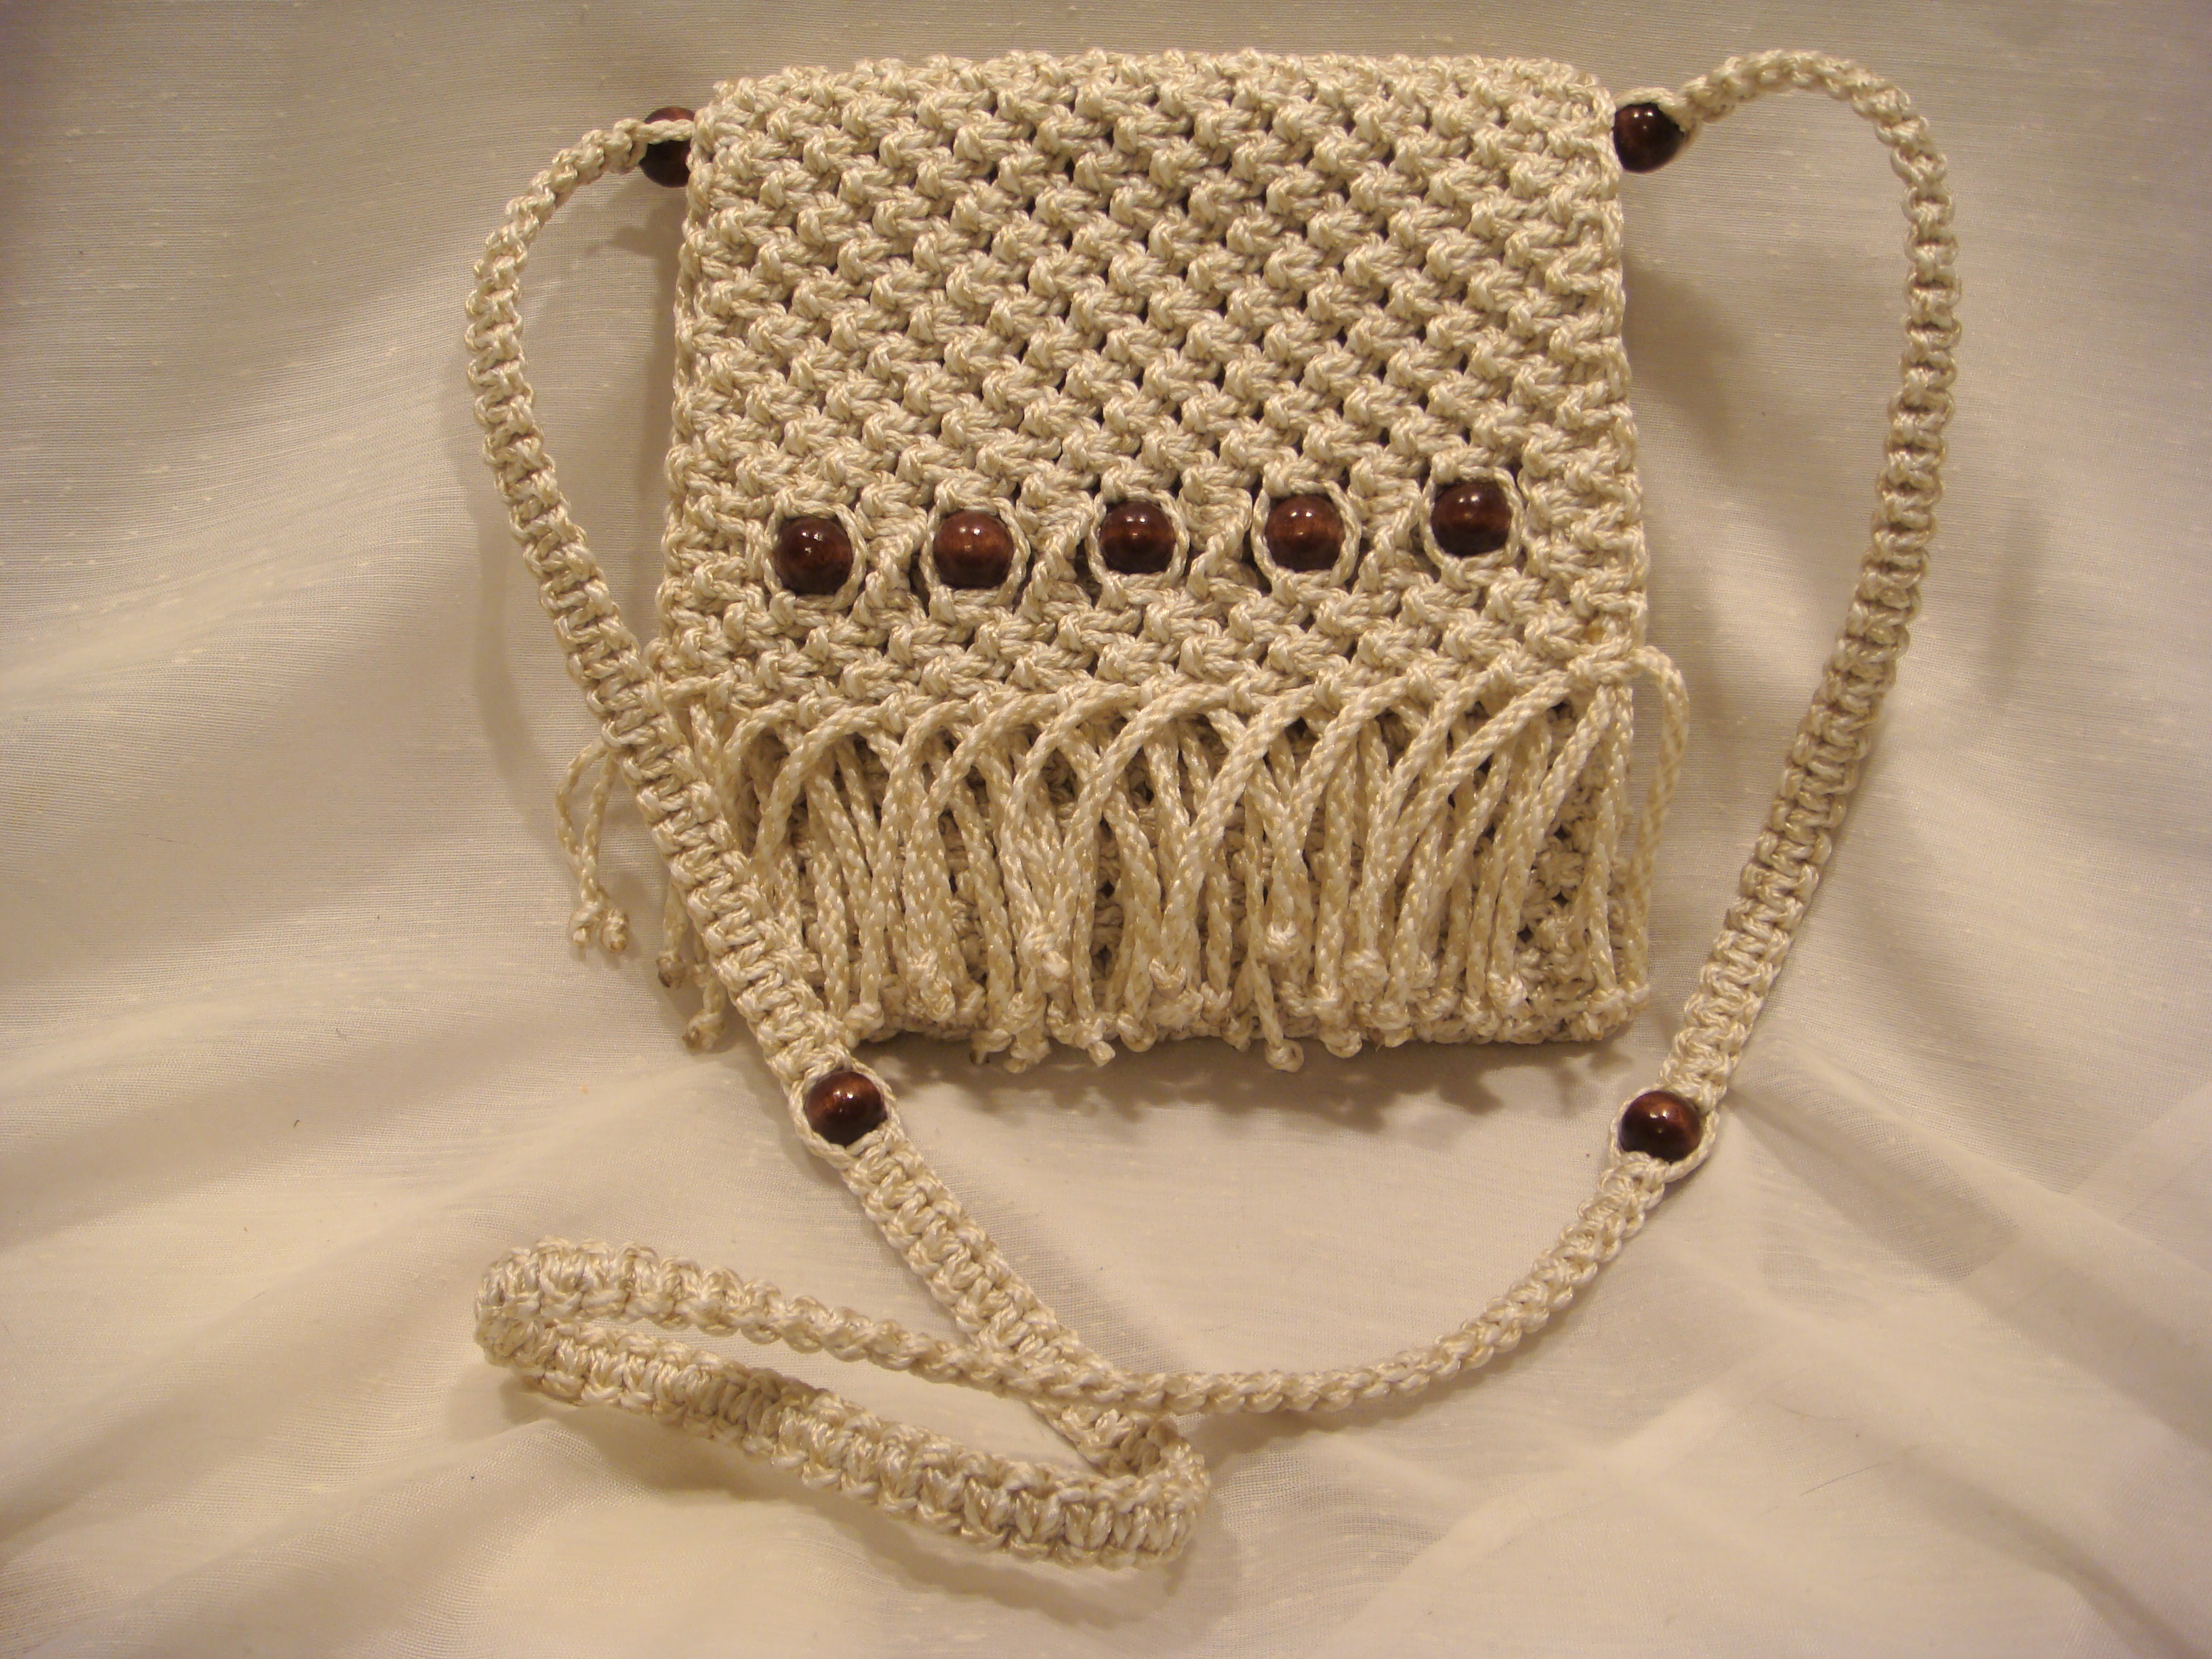 How do I finish this bag? I thought of having a fringe sling bag but I  guess that's not possible anymore because of these short cords. Any  suggestions? : r/macrame